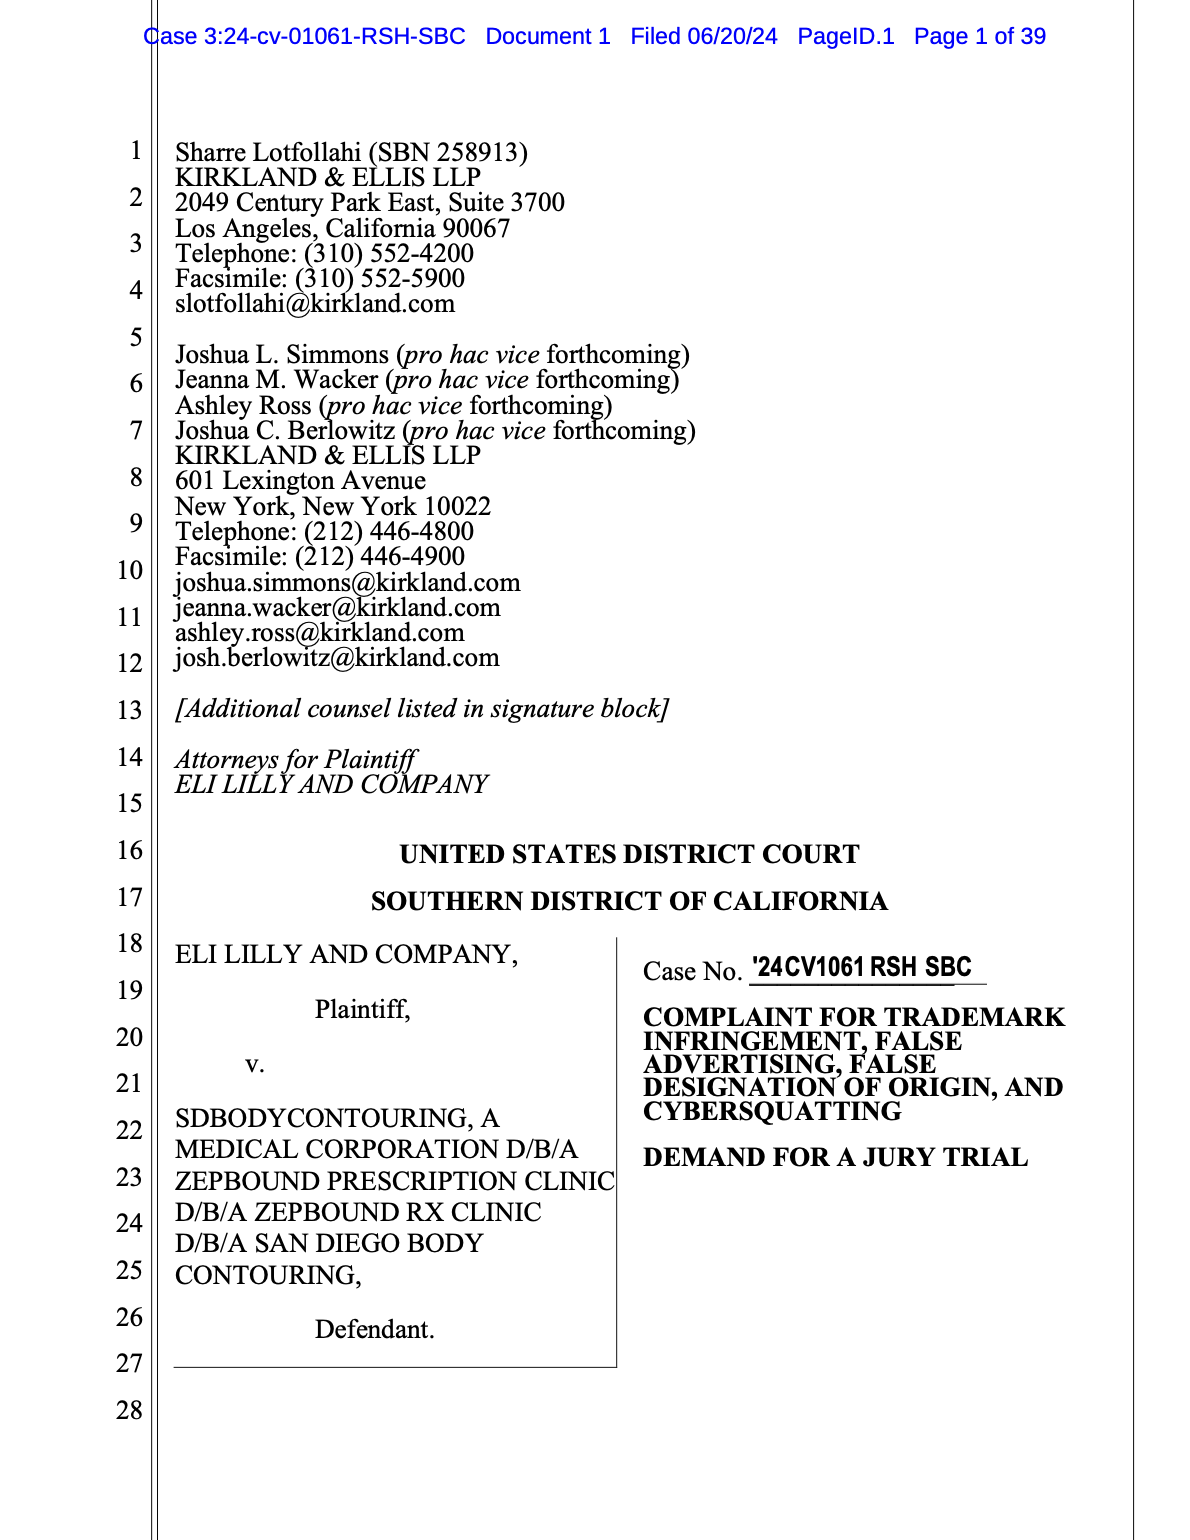 <a href="https://www.safemedicines.org/wp-content/uploads/2019/09/Eli-Lilly-v-SDBodyContouring-complaint.pdf">Eli Lilly v SDBodyContouring</a><br>Filed in California, June 20, 2024